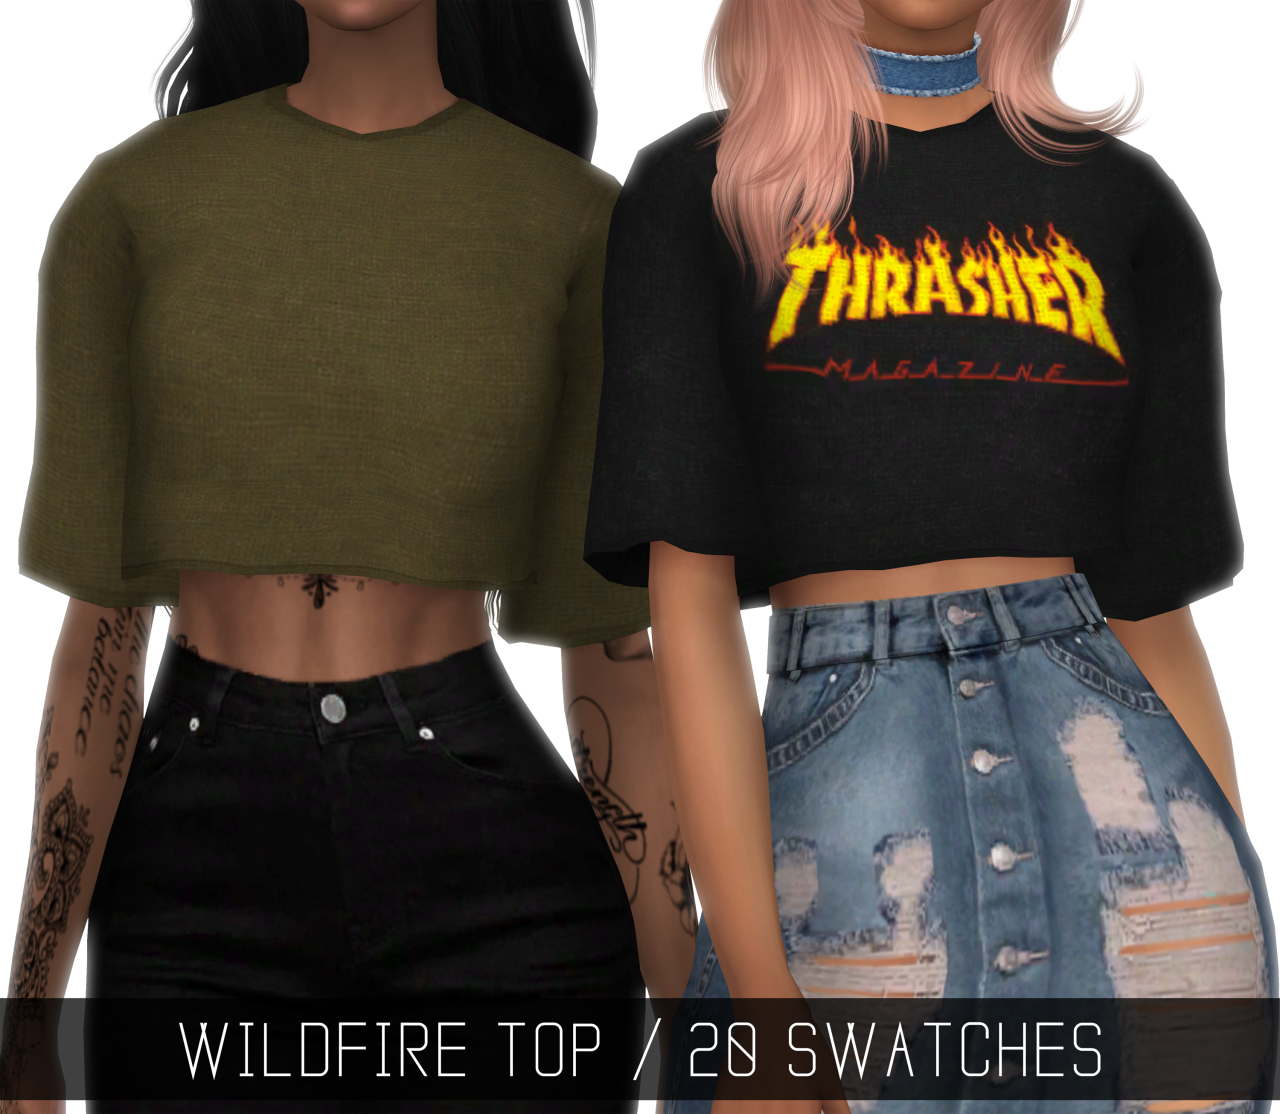 spand svar Syd Simpliciaty] — WILDFIRE TOP “Oversized Crop Top” 20 swatches (15...